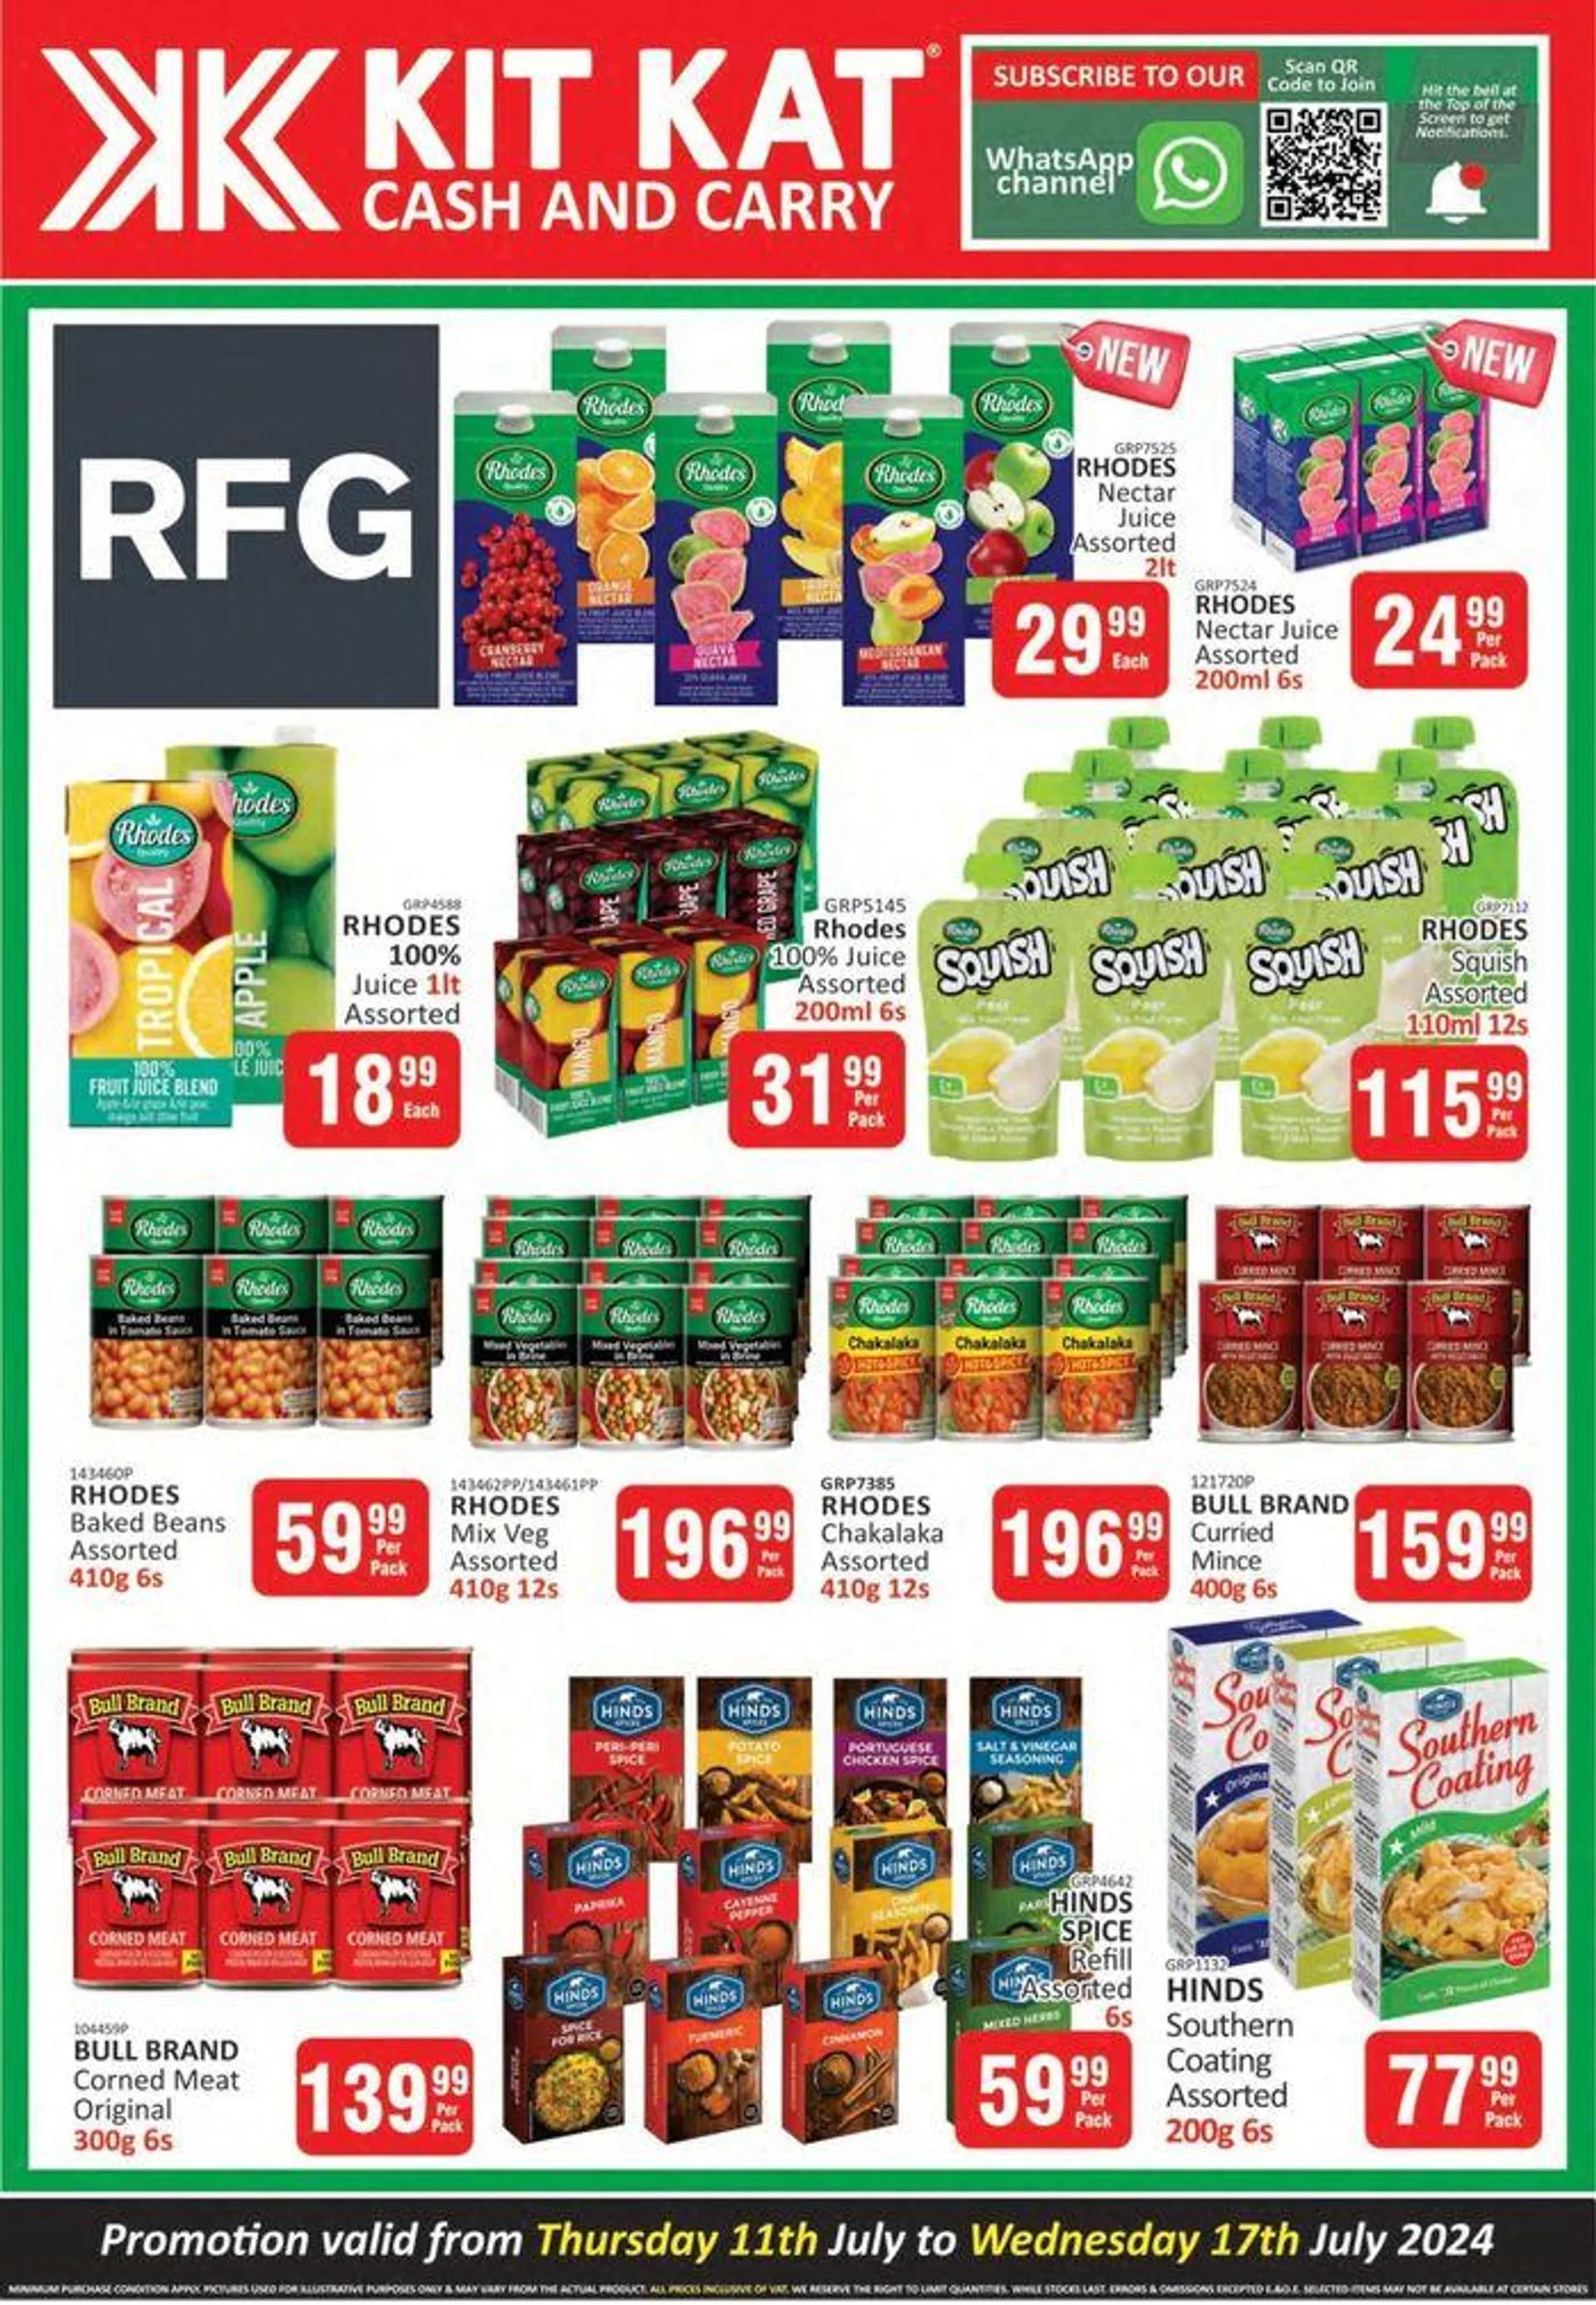 KitKat Cash and Carry weekly specials - 1